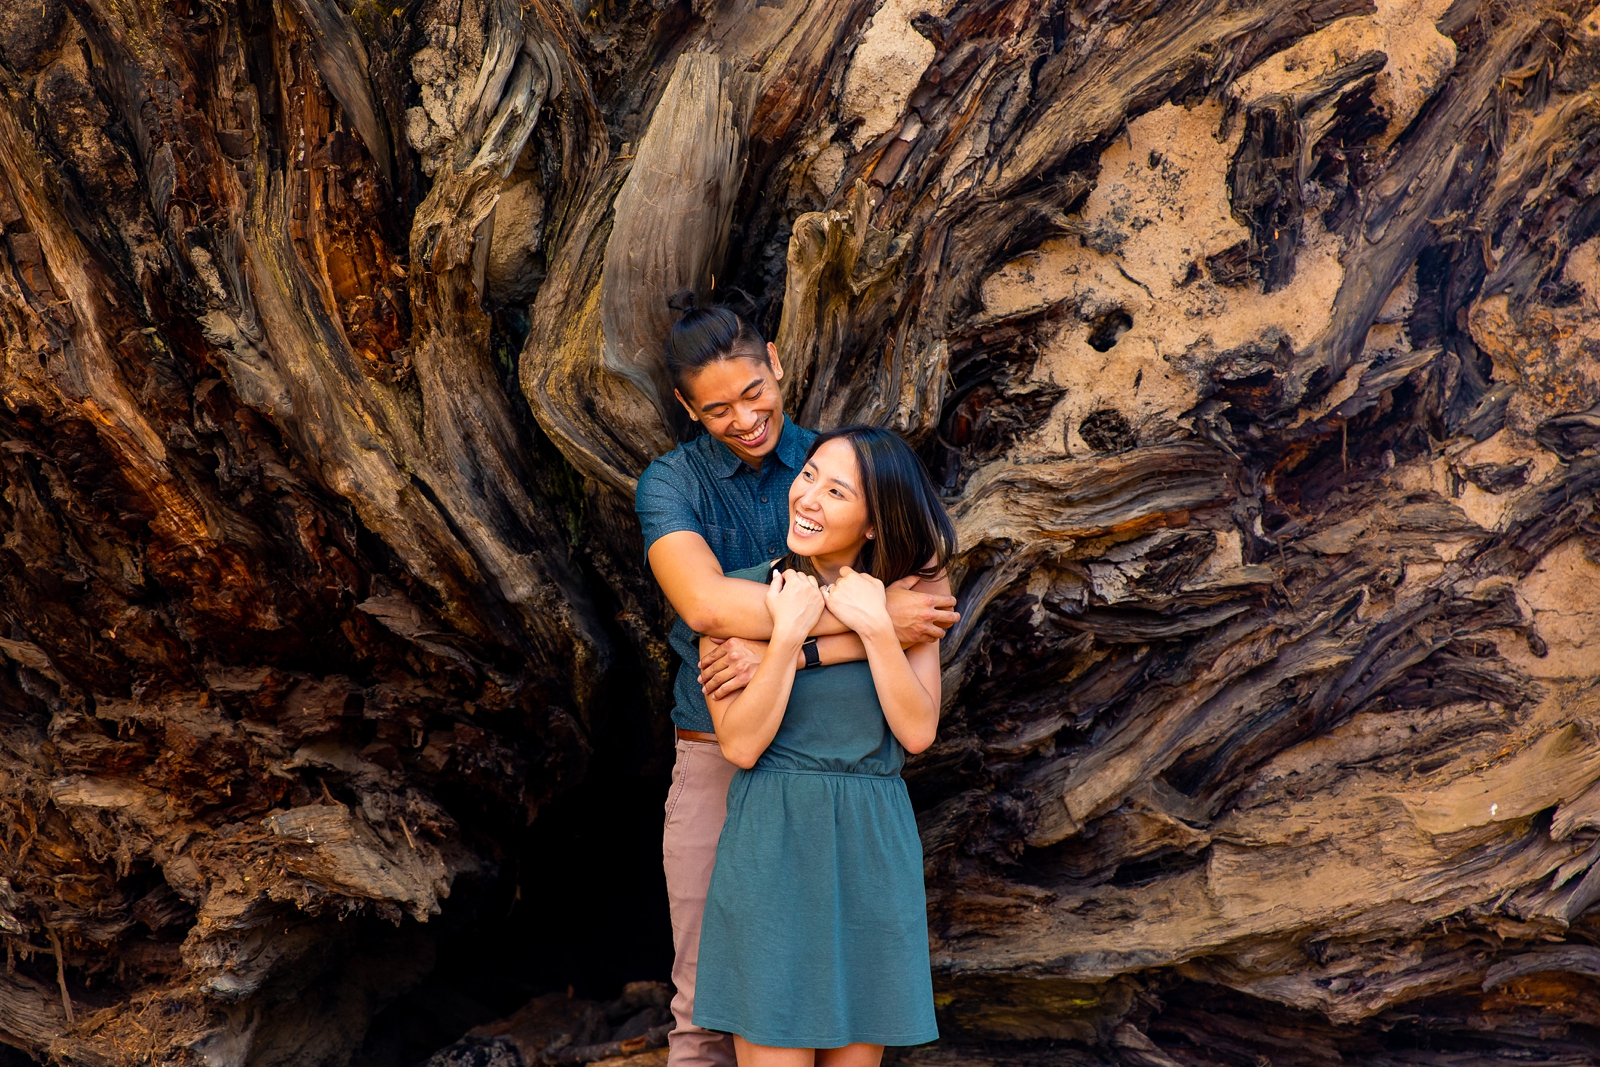 This couple had an adventurous engagement session in Sequoia National Park.